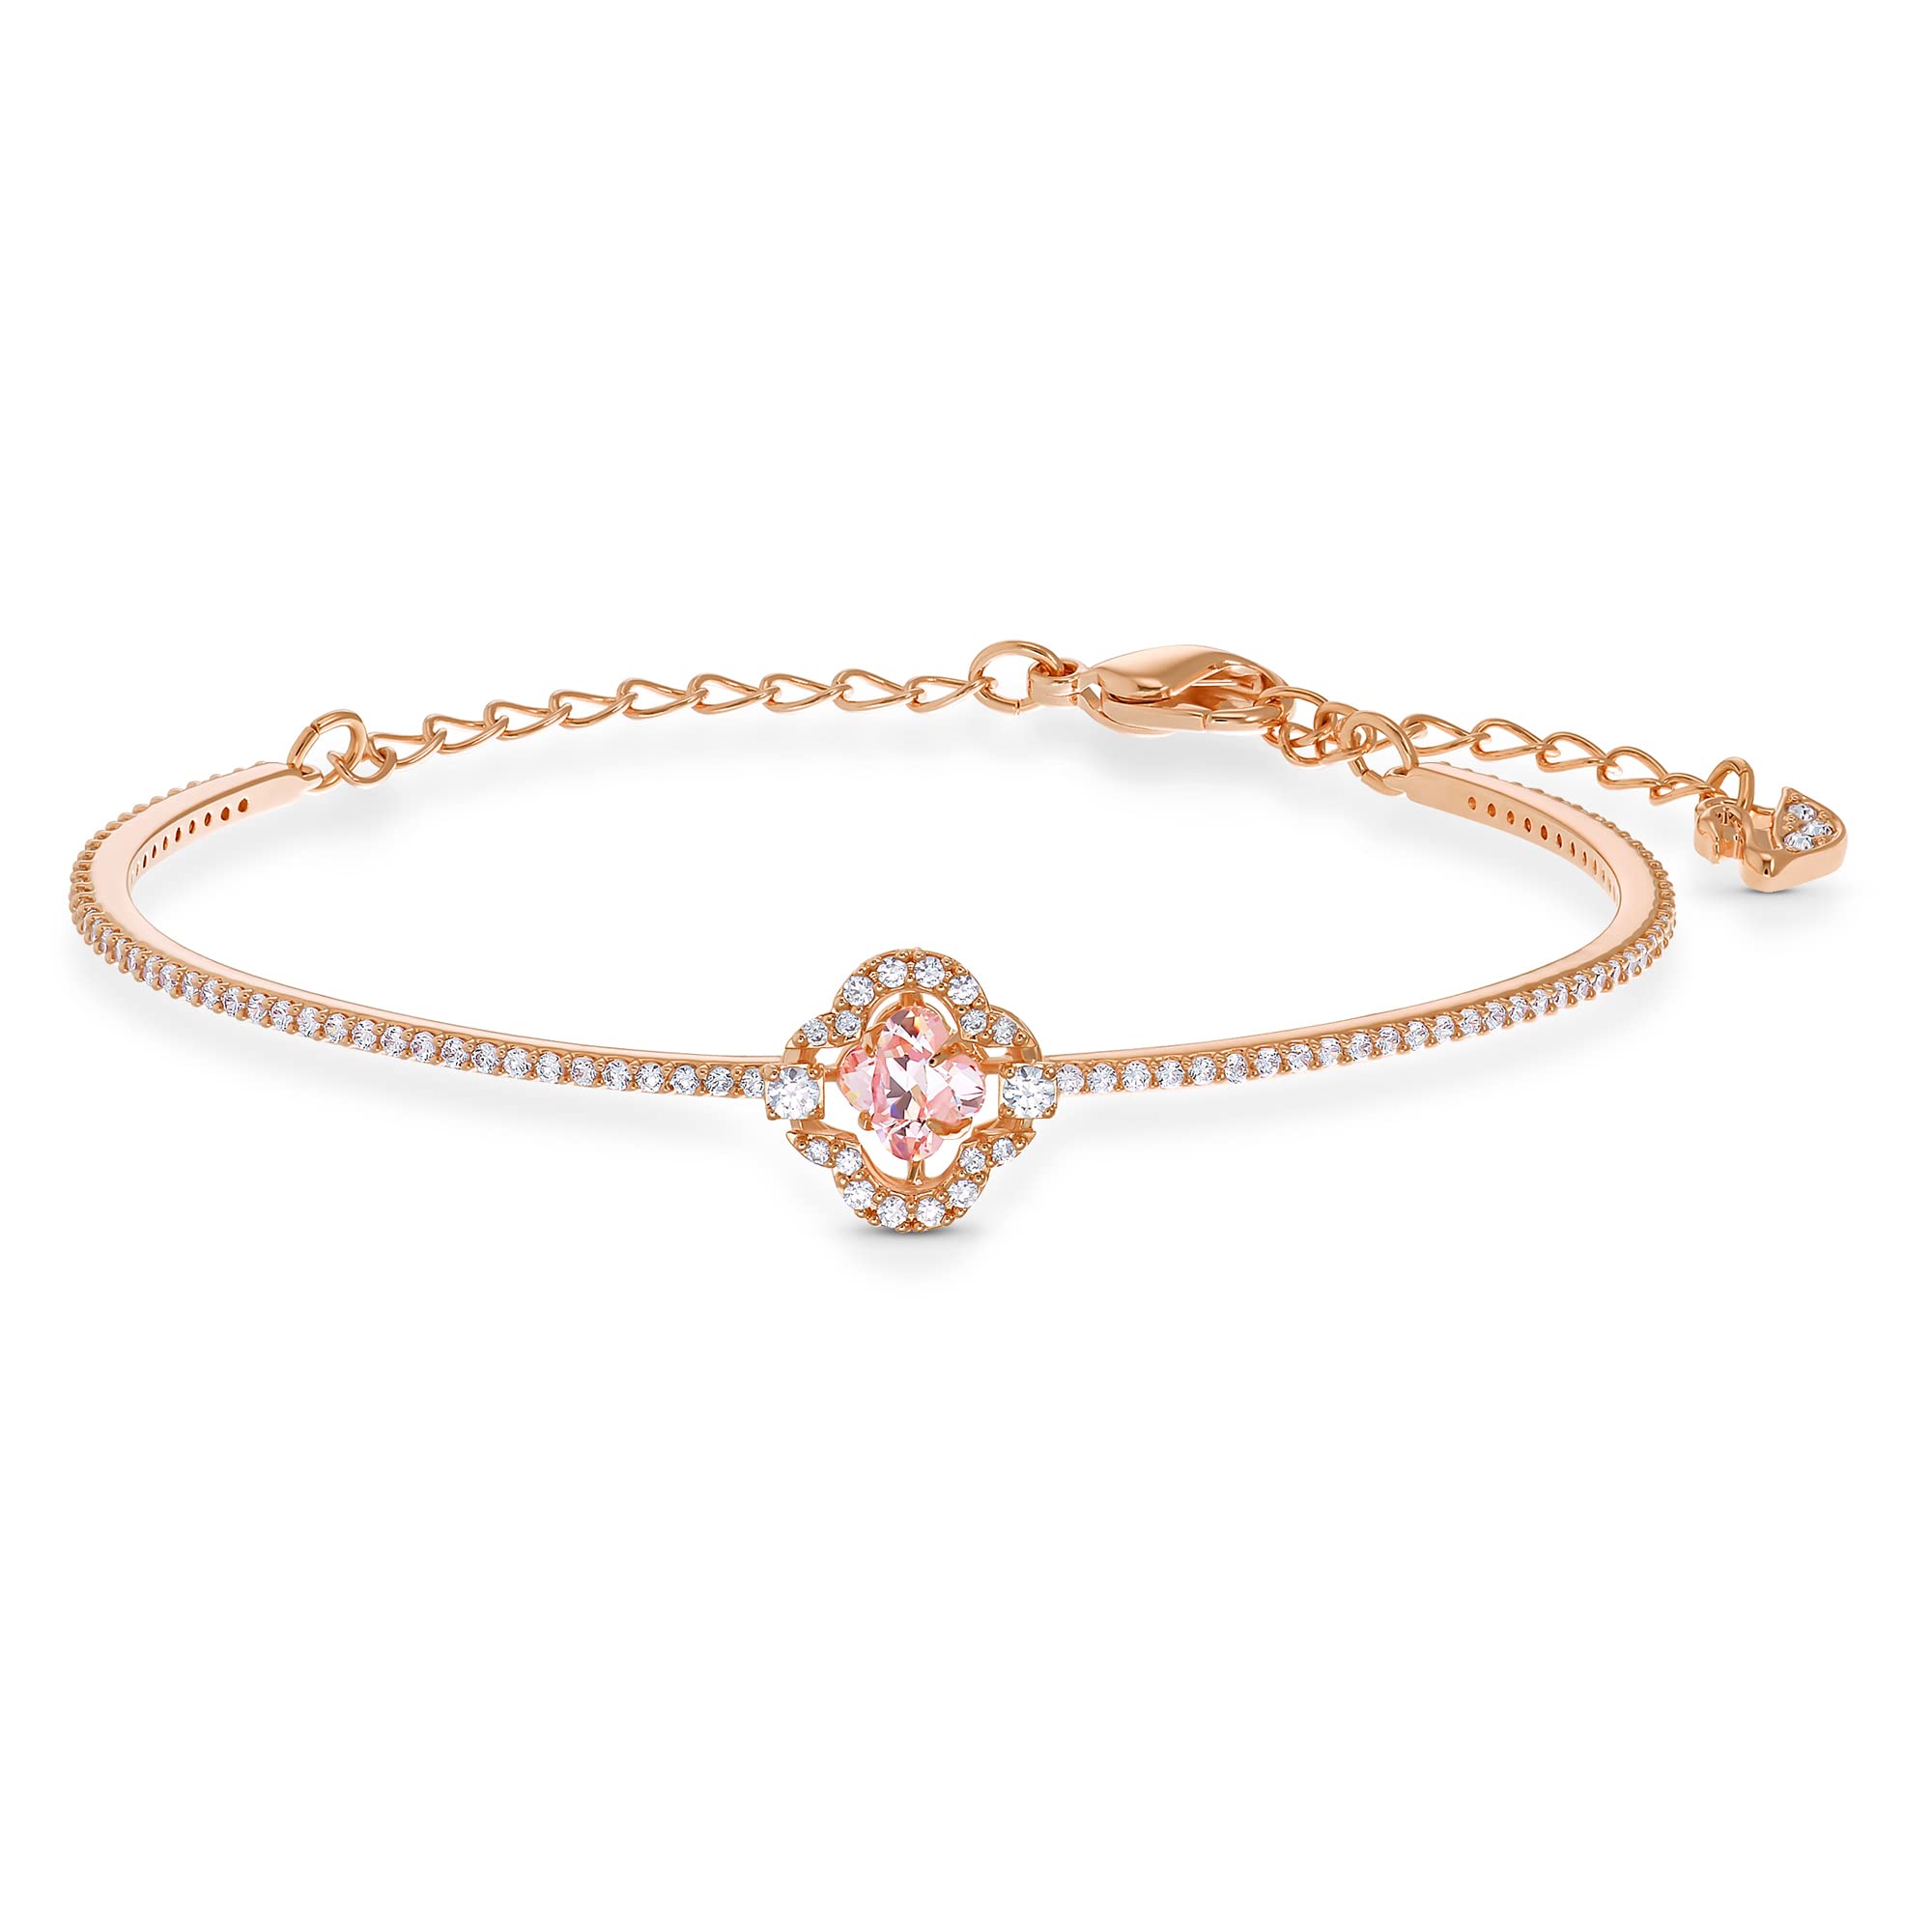 SWAROVSKI Sparkling Dance Clover Jewelry Collection, Rose Gold Tone Finish, Pink Crystals, Clear Crystals